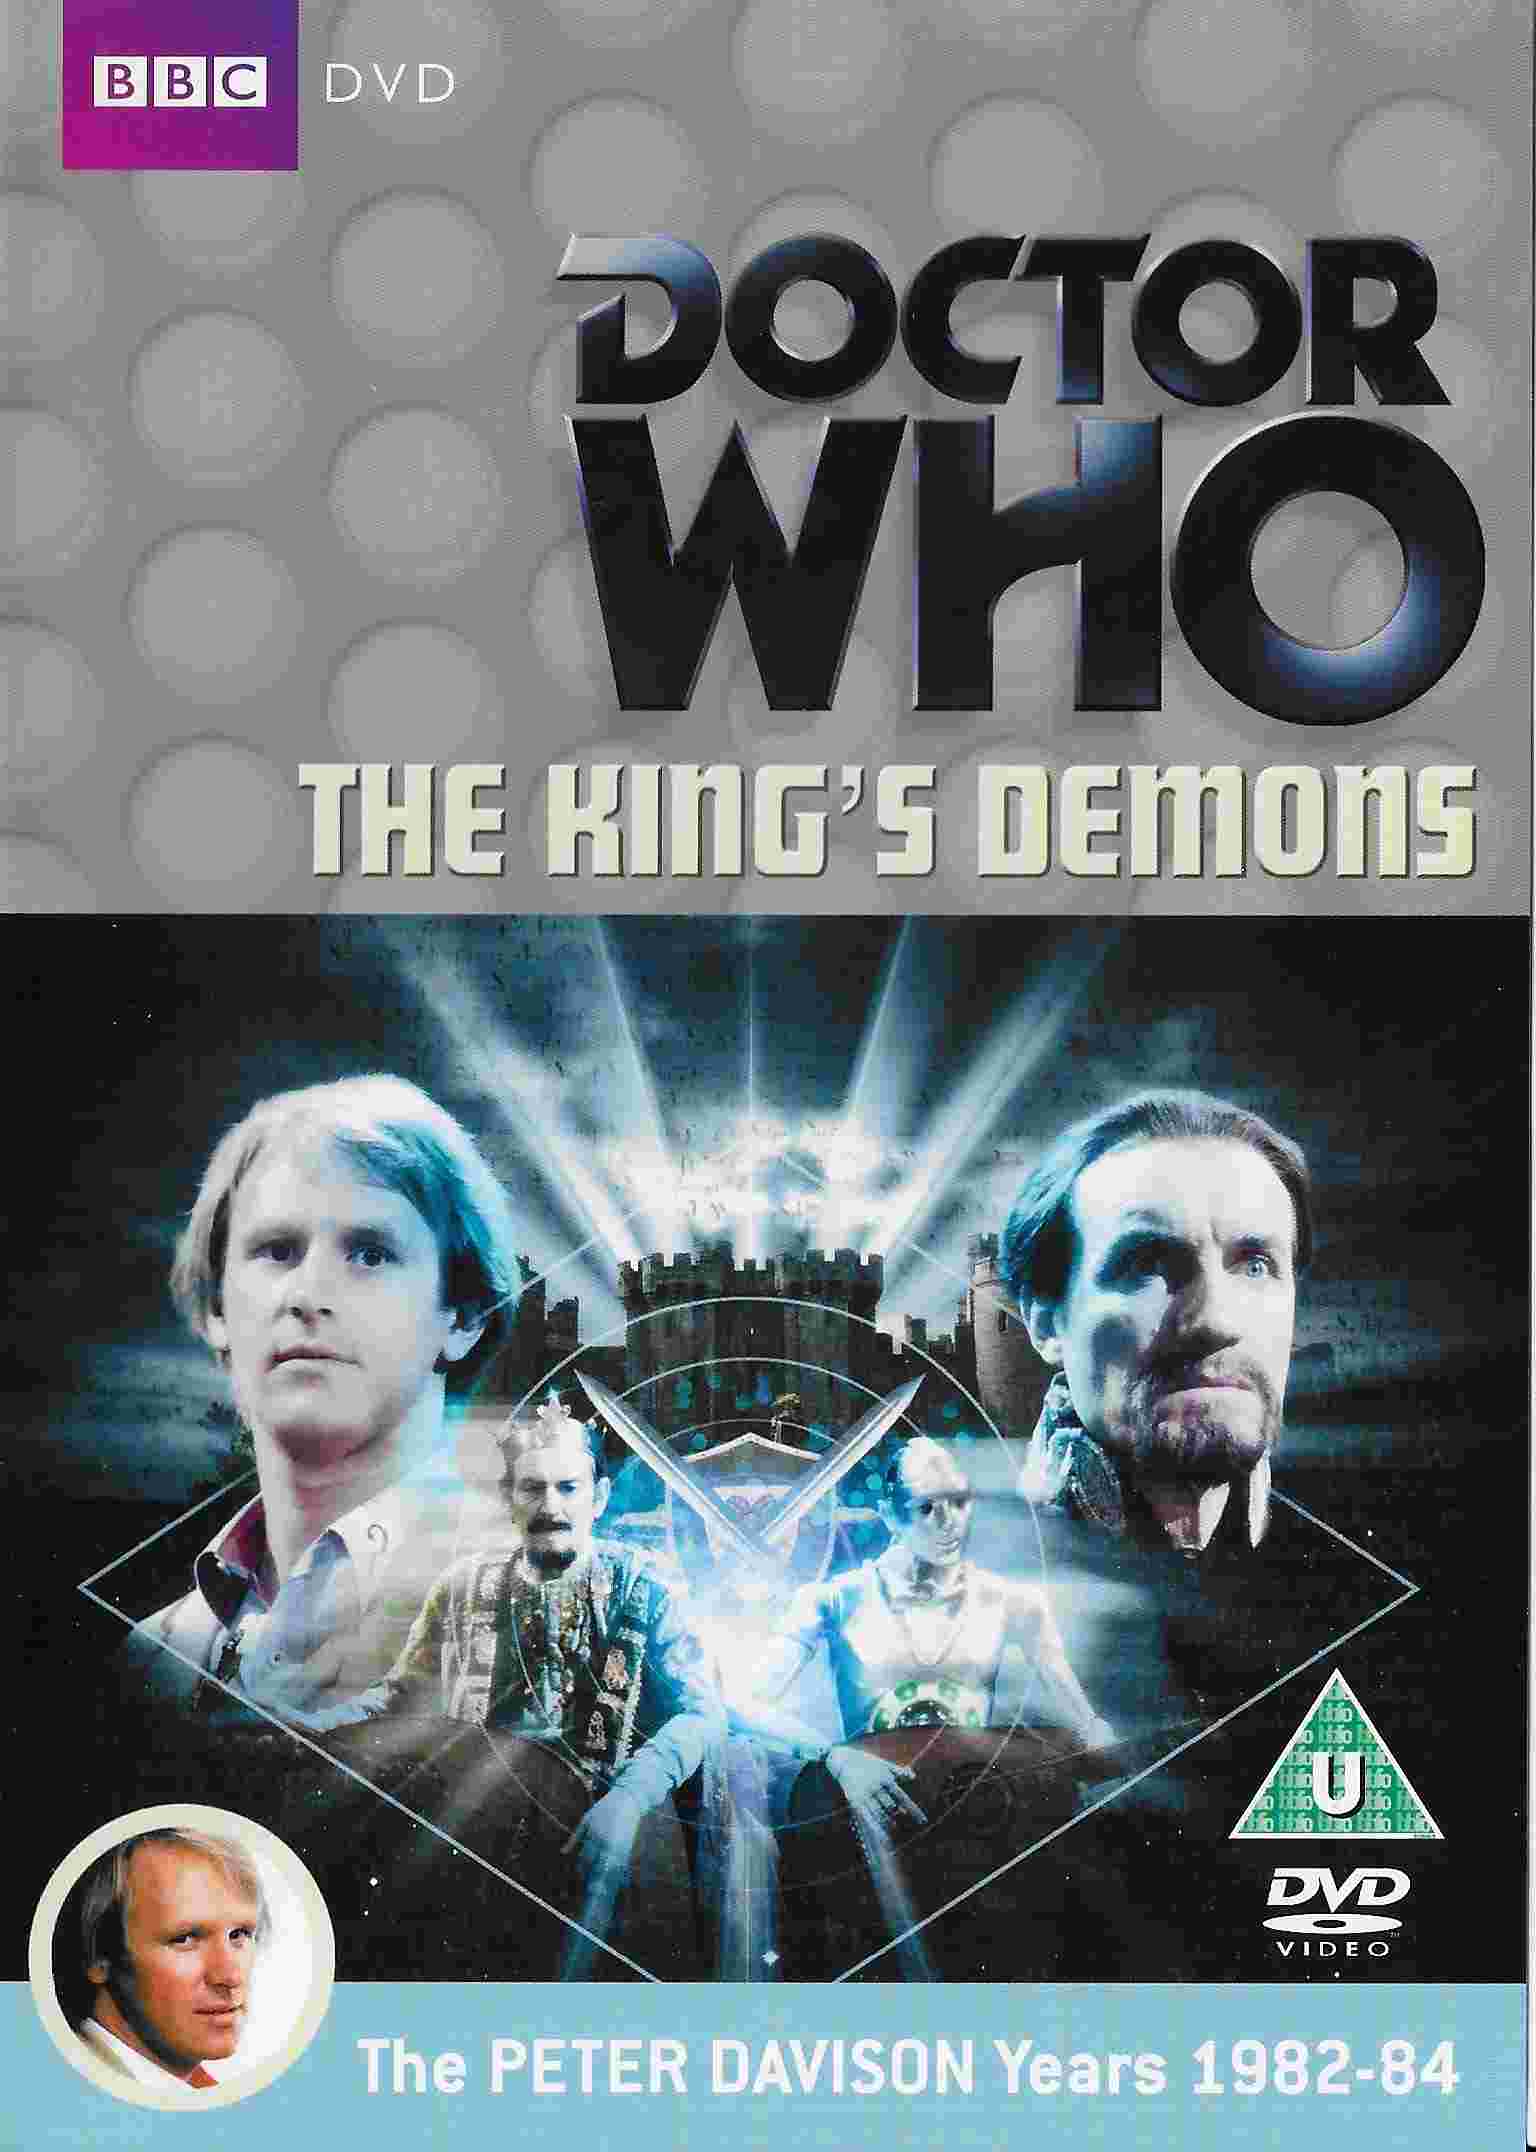 Picture of BBCDVD 2738A Doctor Who - The King's demons by artist Terence Dudley from the BBC dvds - Records and Tapes library